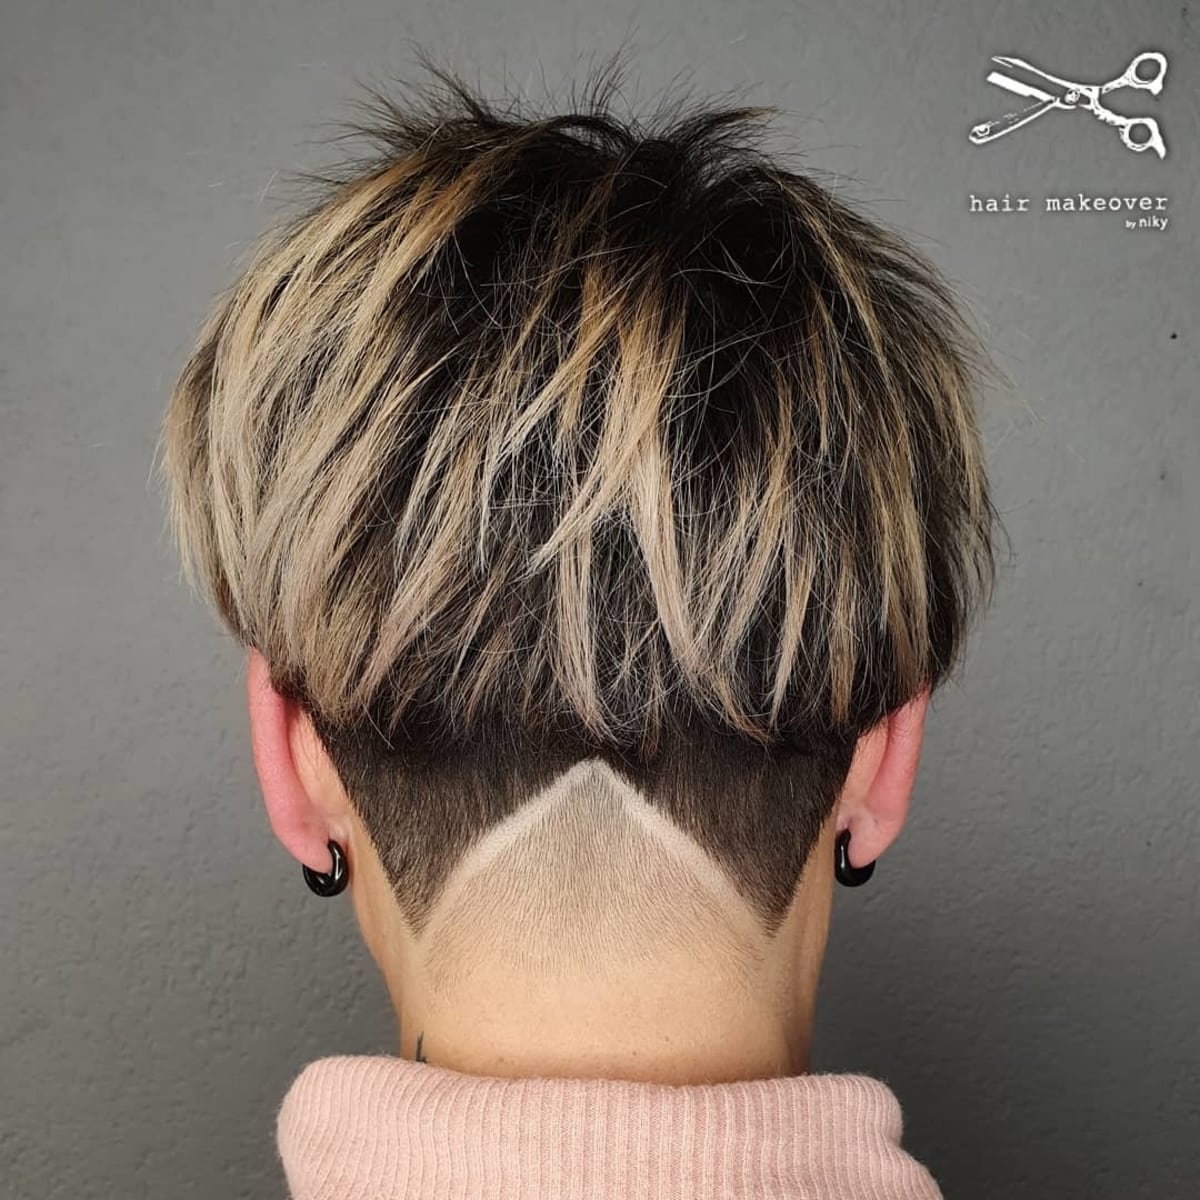 44 Coolest Women's Undercut Hairstyles To Try in 2023